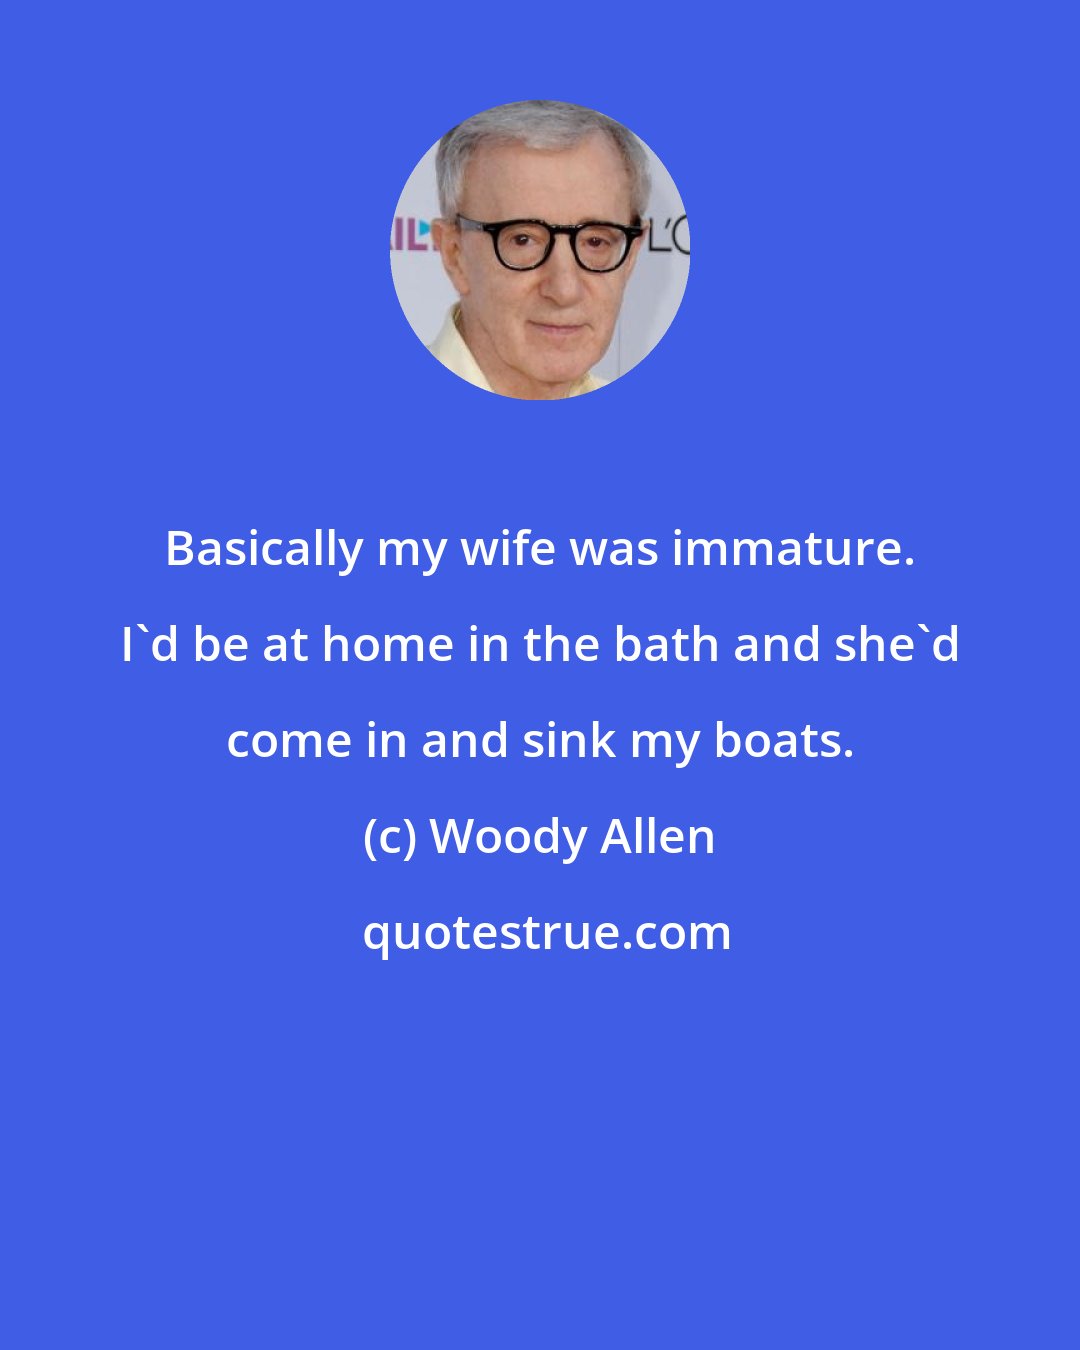 Woody Allen: Basically my wife was immature. I'd be at home in the bath and she'd come in and sink my boats.